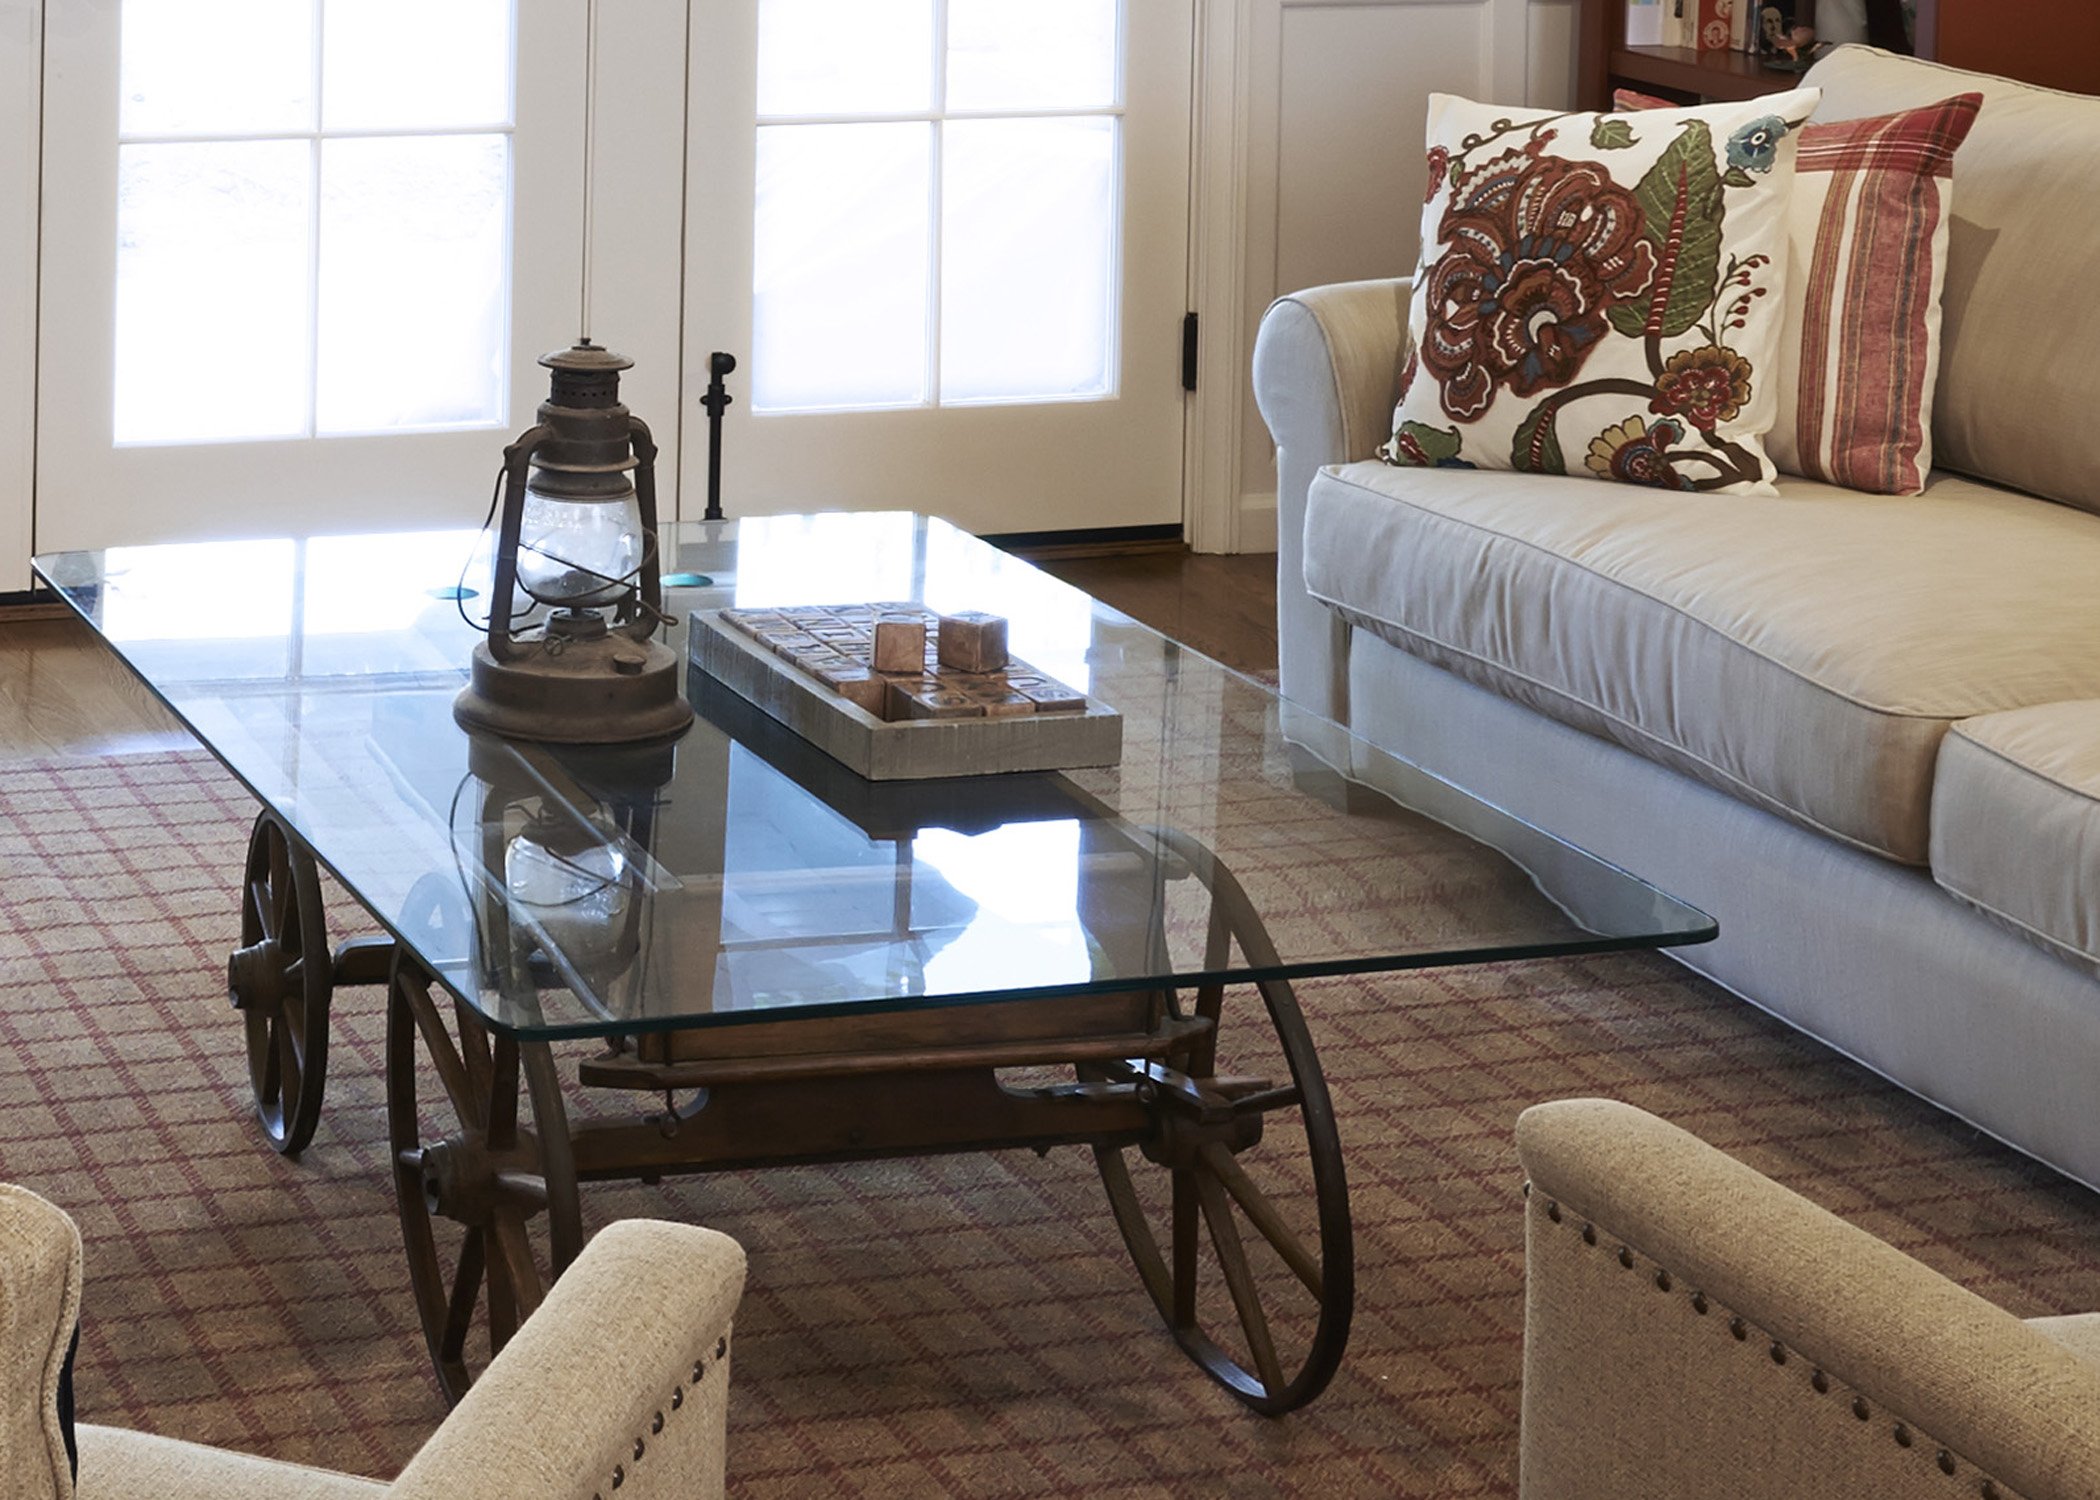 Bellaire House coffee Table.jpg